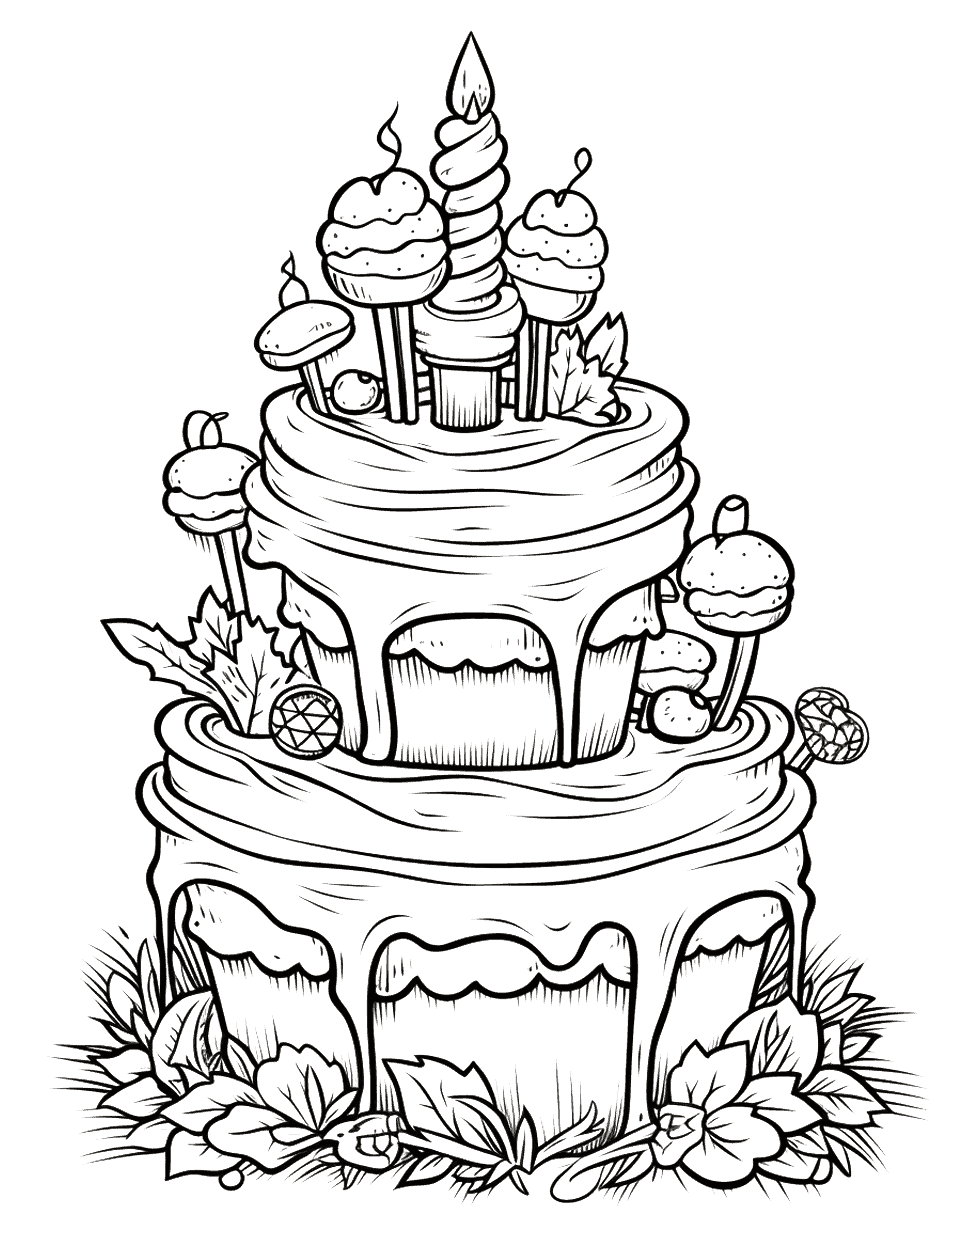 Enchanted Forest Cake Coloring Page - A cake with elements from a mystical forest.